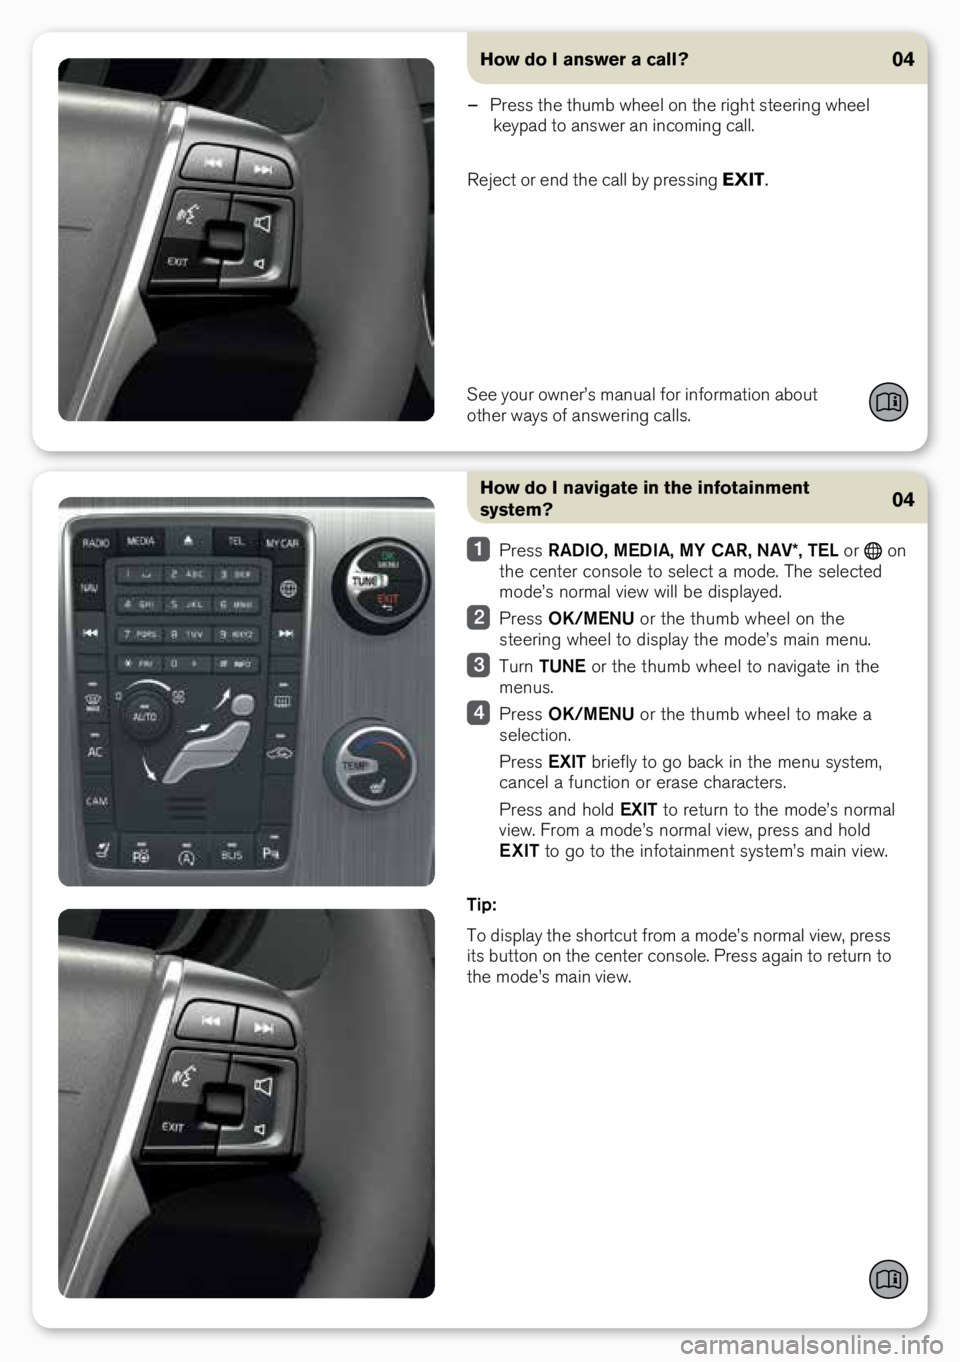 VOLVO S60 INSCRIPTION 2016  Quick Guide How do I navigate in the infotainment 
system?
 Pre\f\f  RADIO,  MEDIA, MY CAR,  NAV*, TEL \br  \bn 
the center c\bn\f\ble t\b \felect a m\bde. The \felected 
m\bde’\f n\brmal view will be di\fplaye